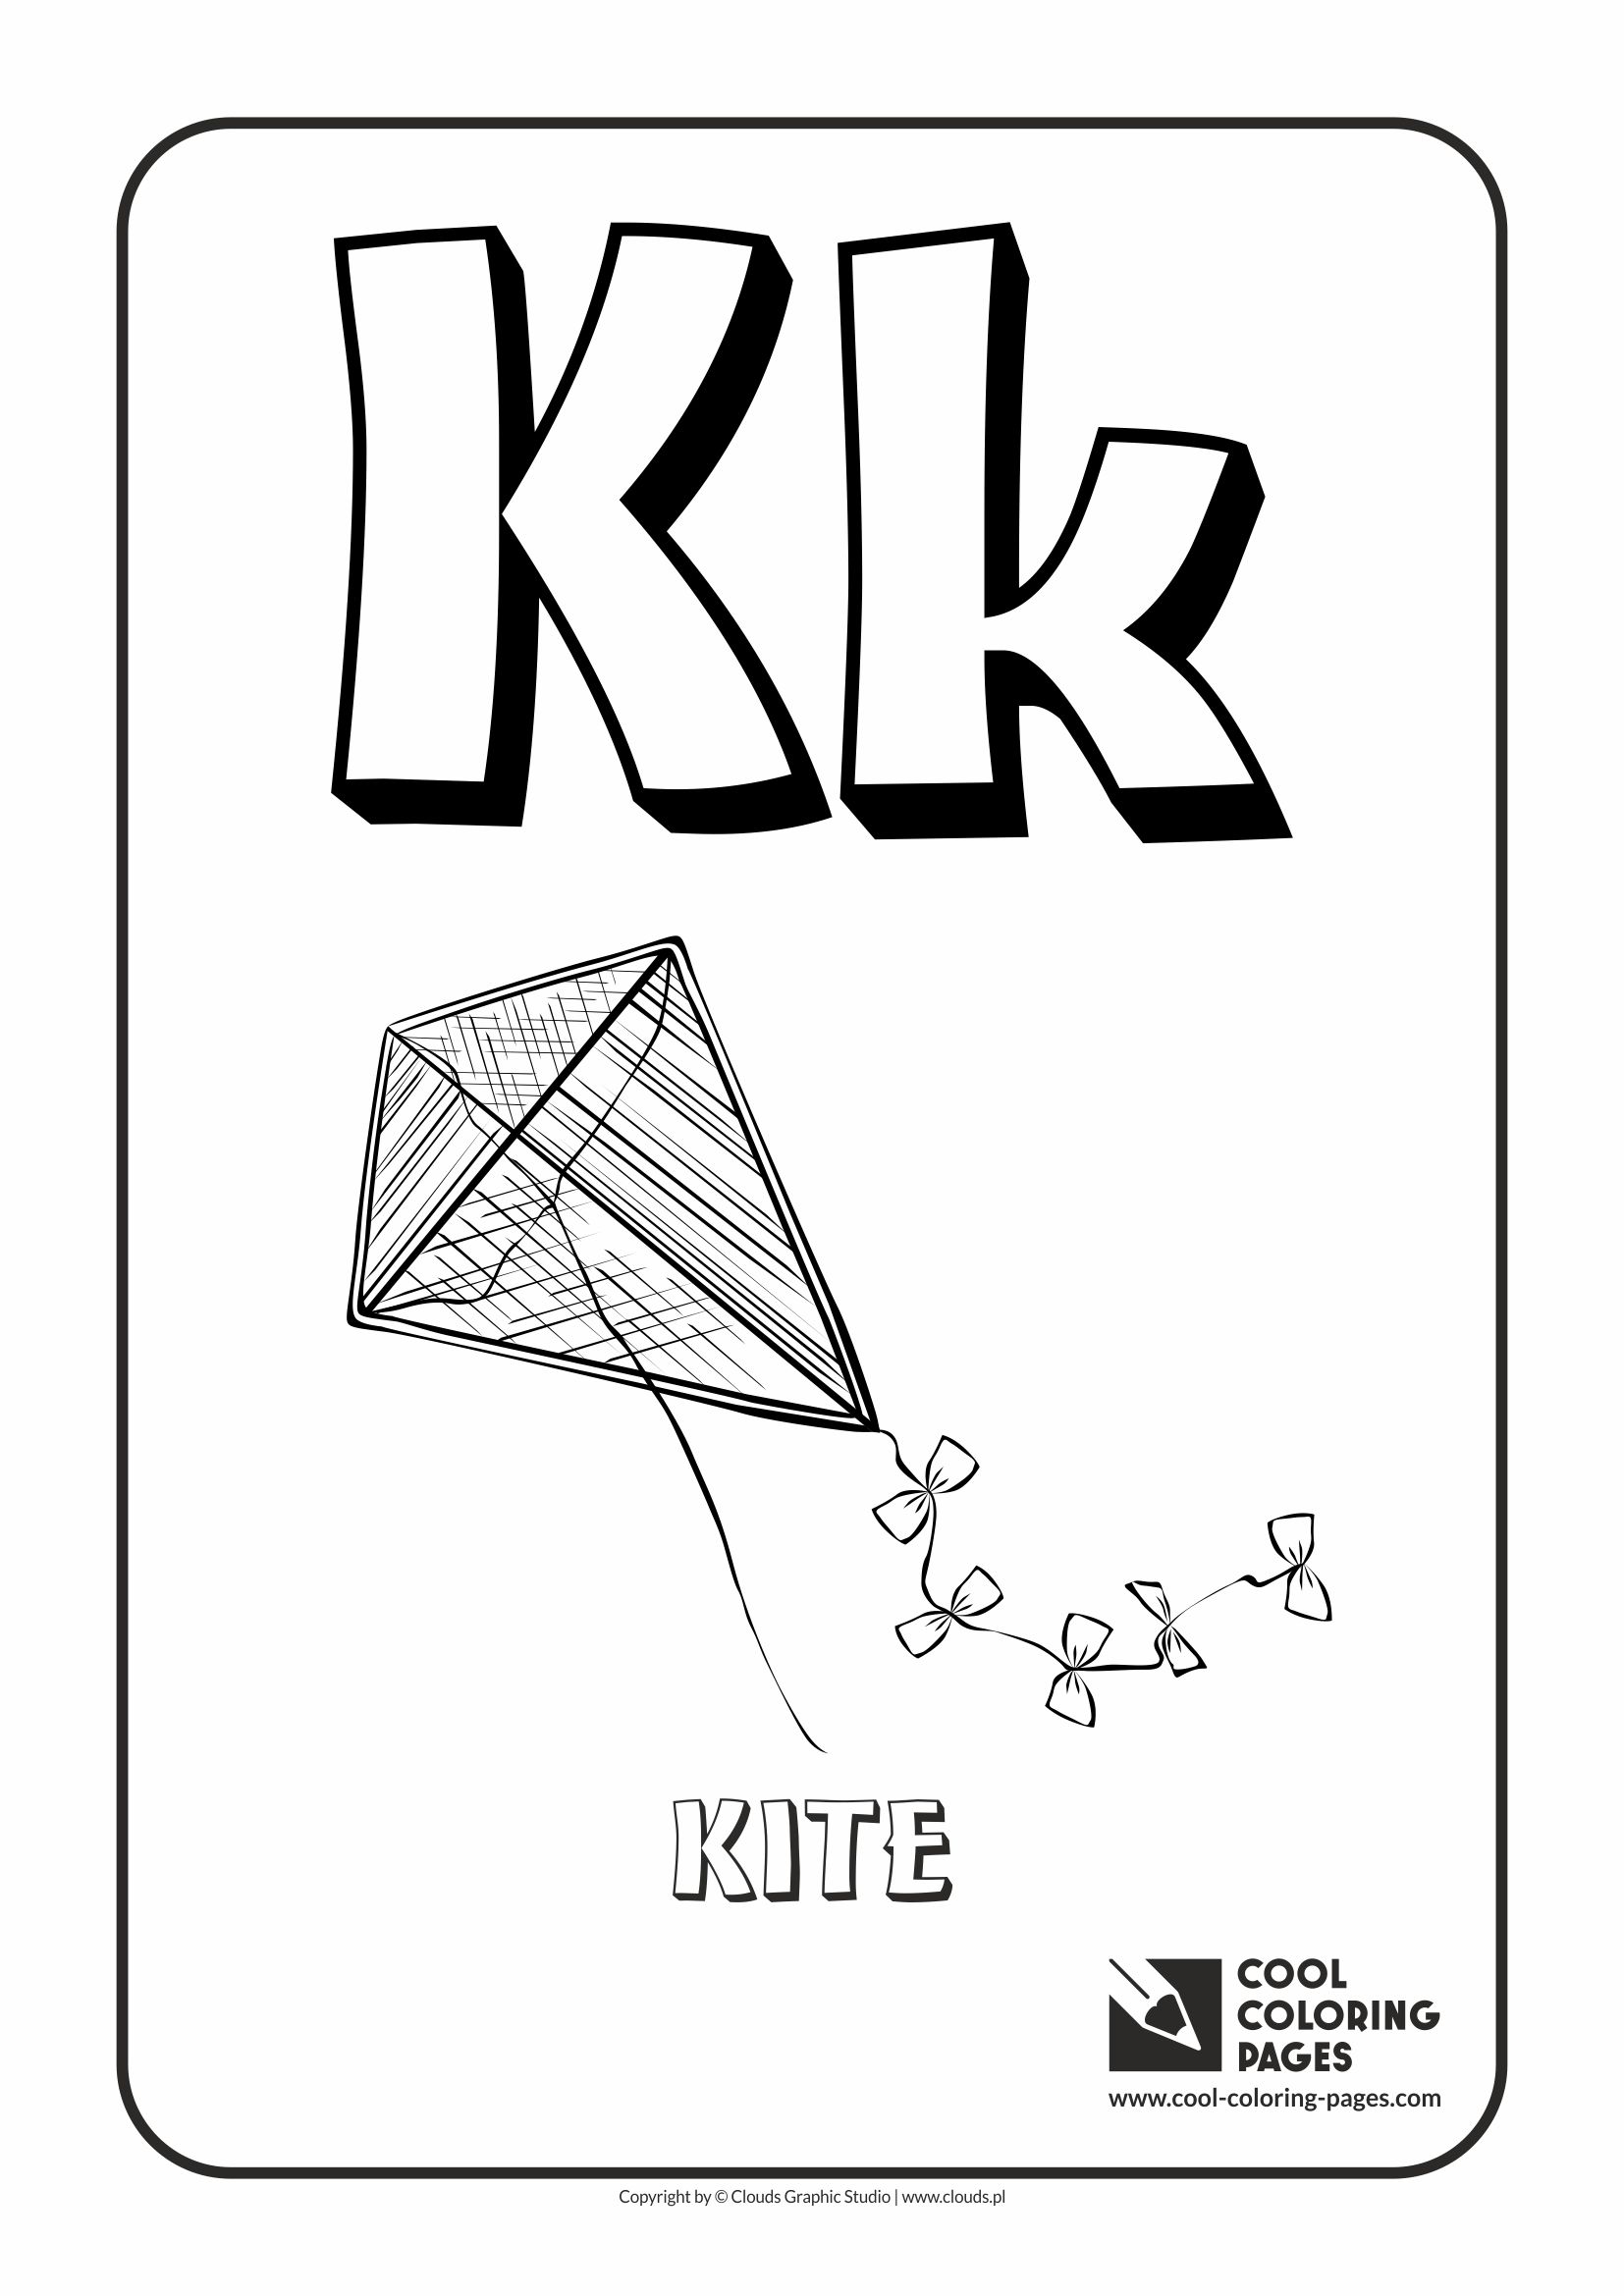 Cool Coloring Pages - Alphabet / Letter K / Coloring page with letter K